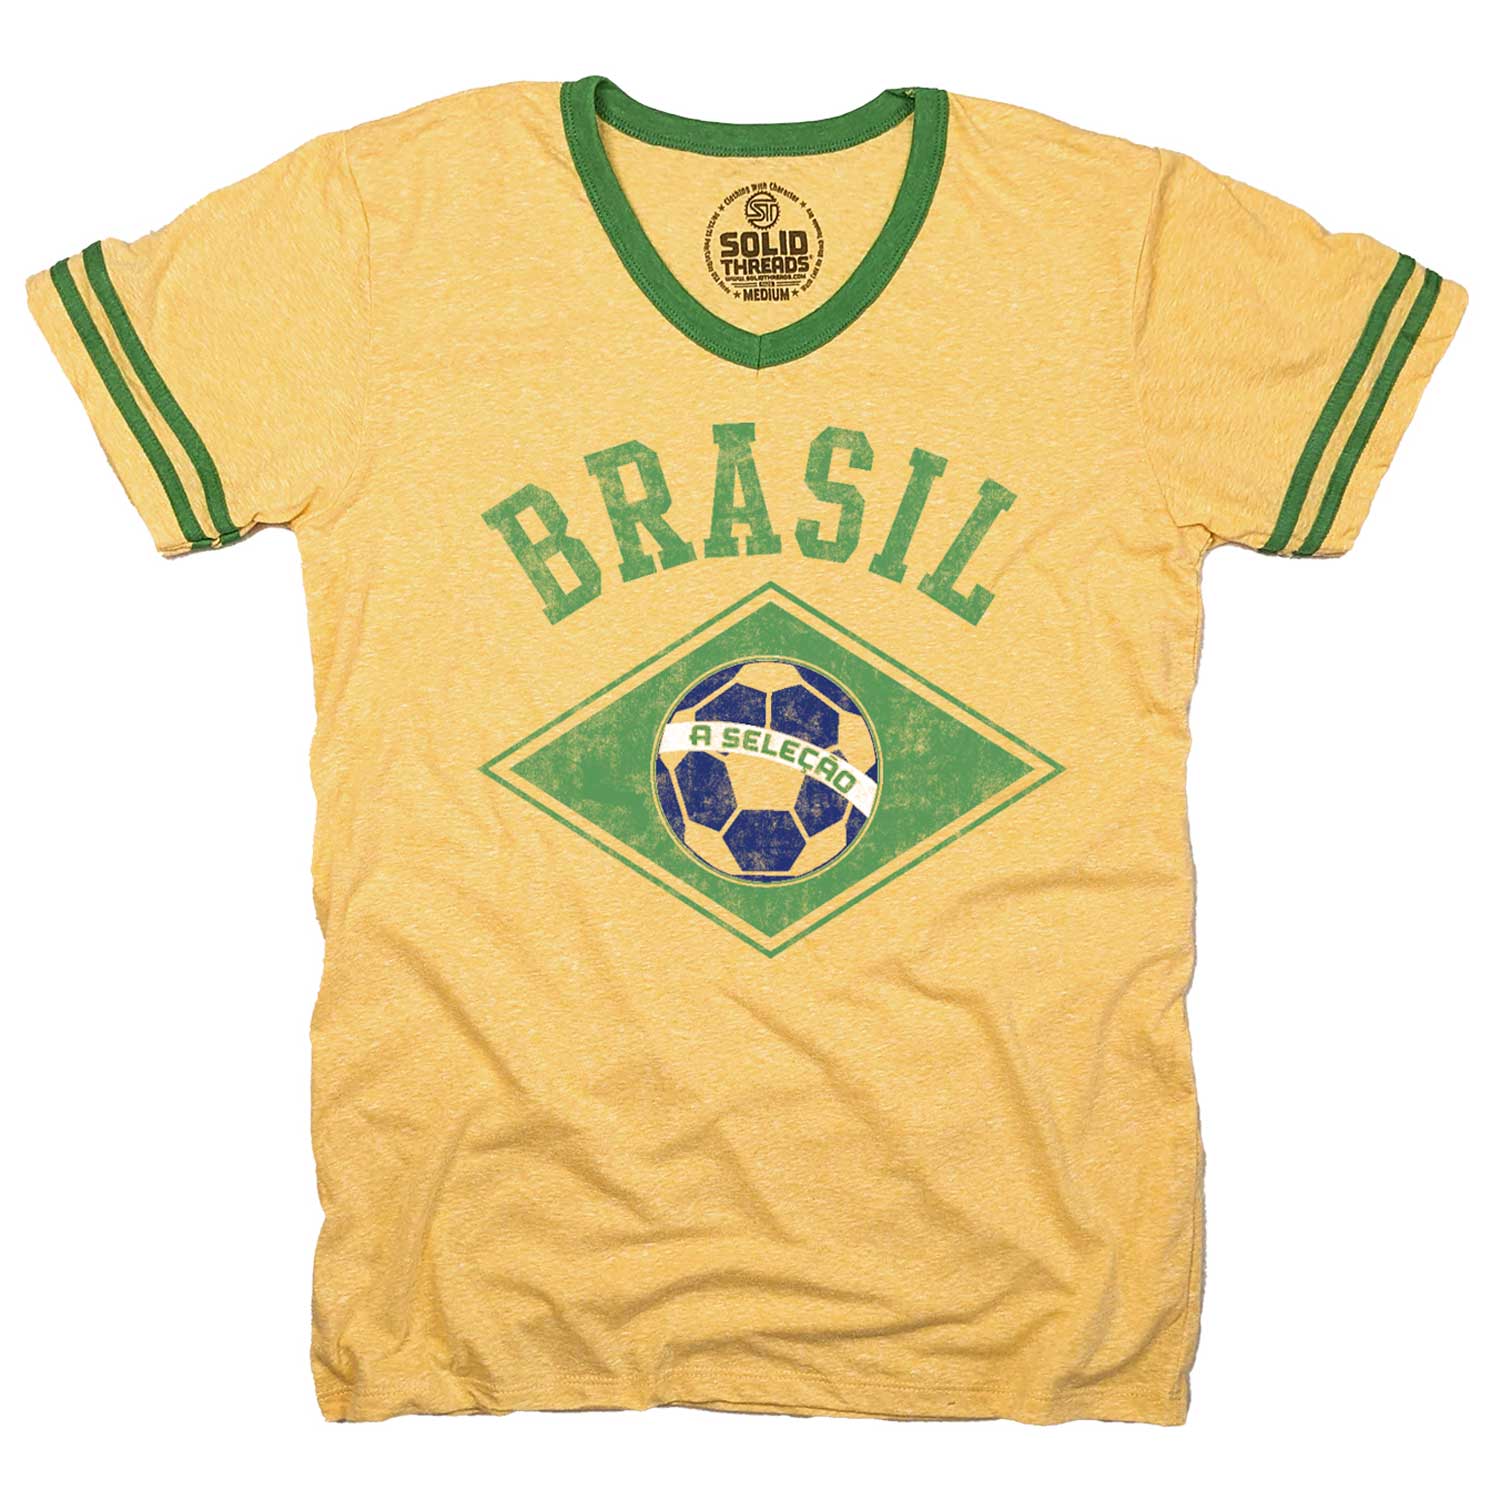 Brazil t-shirts in national football colours on sale on a stall